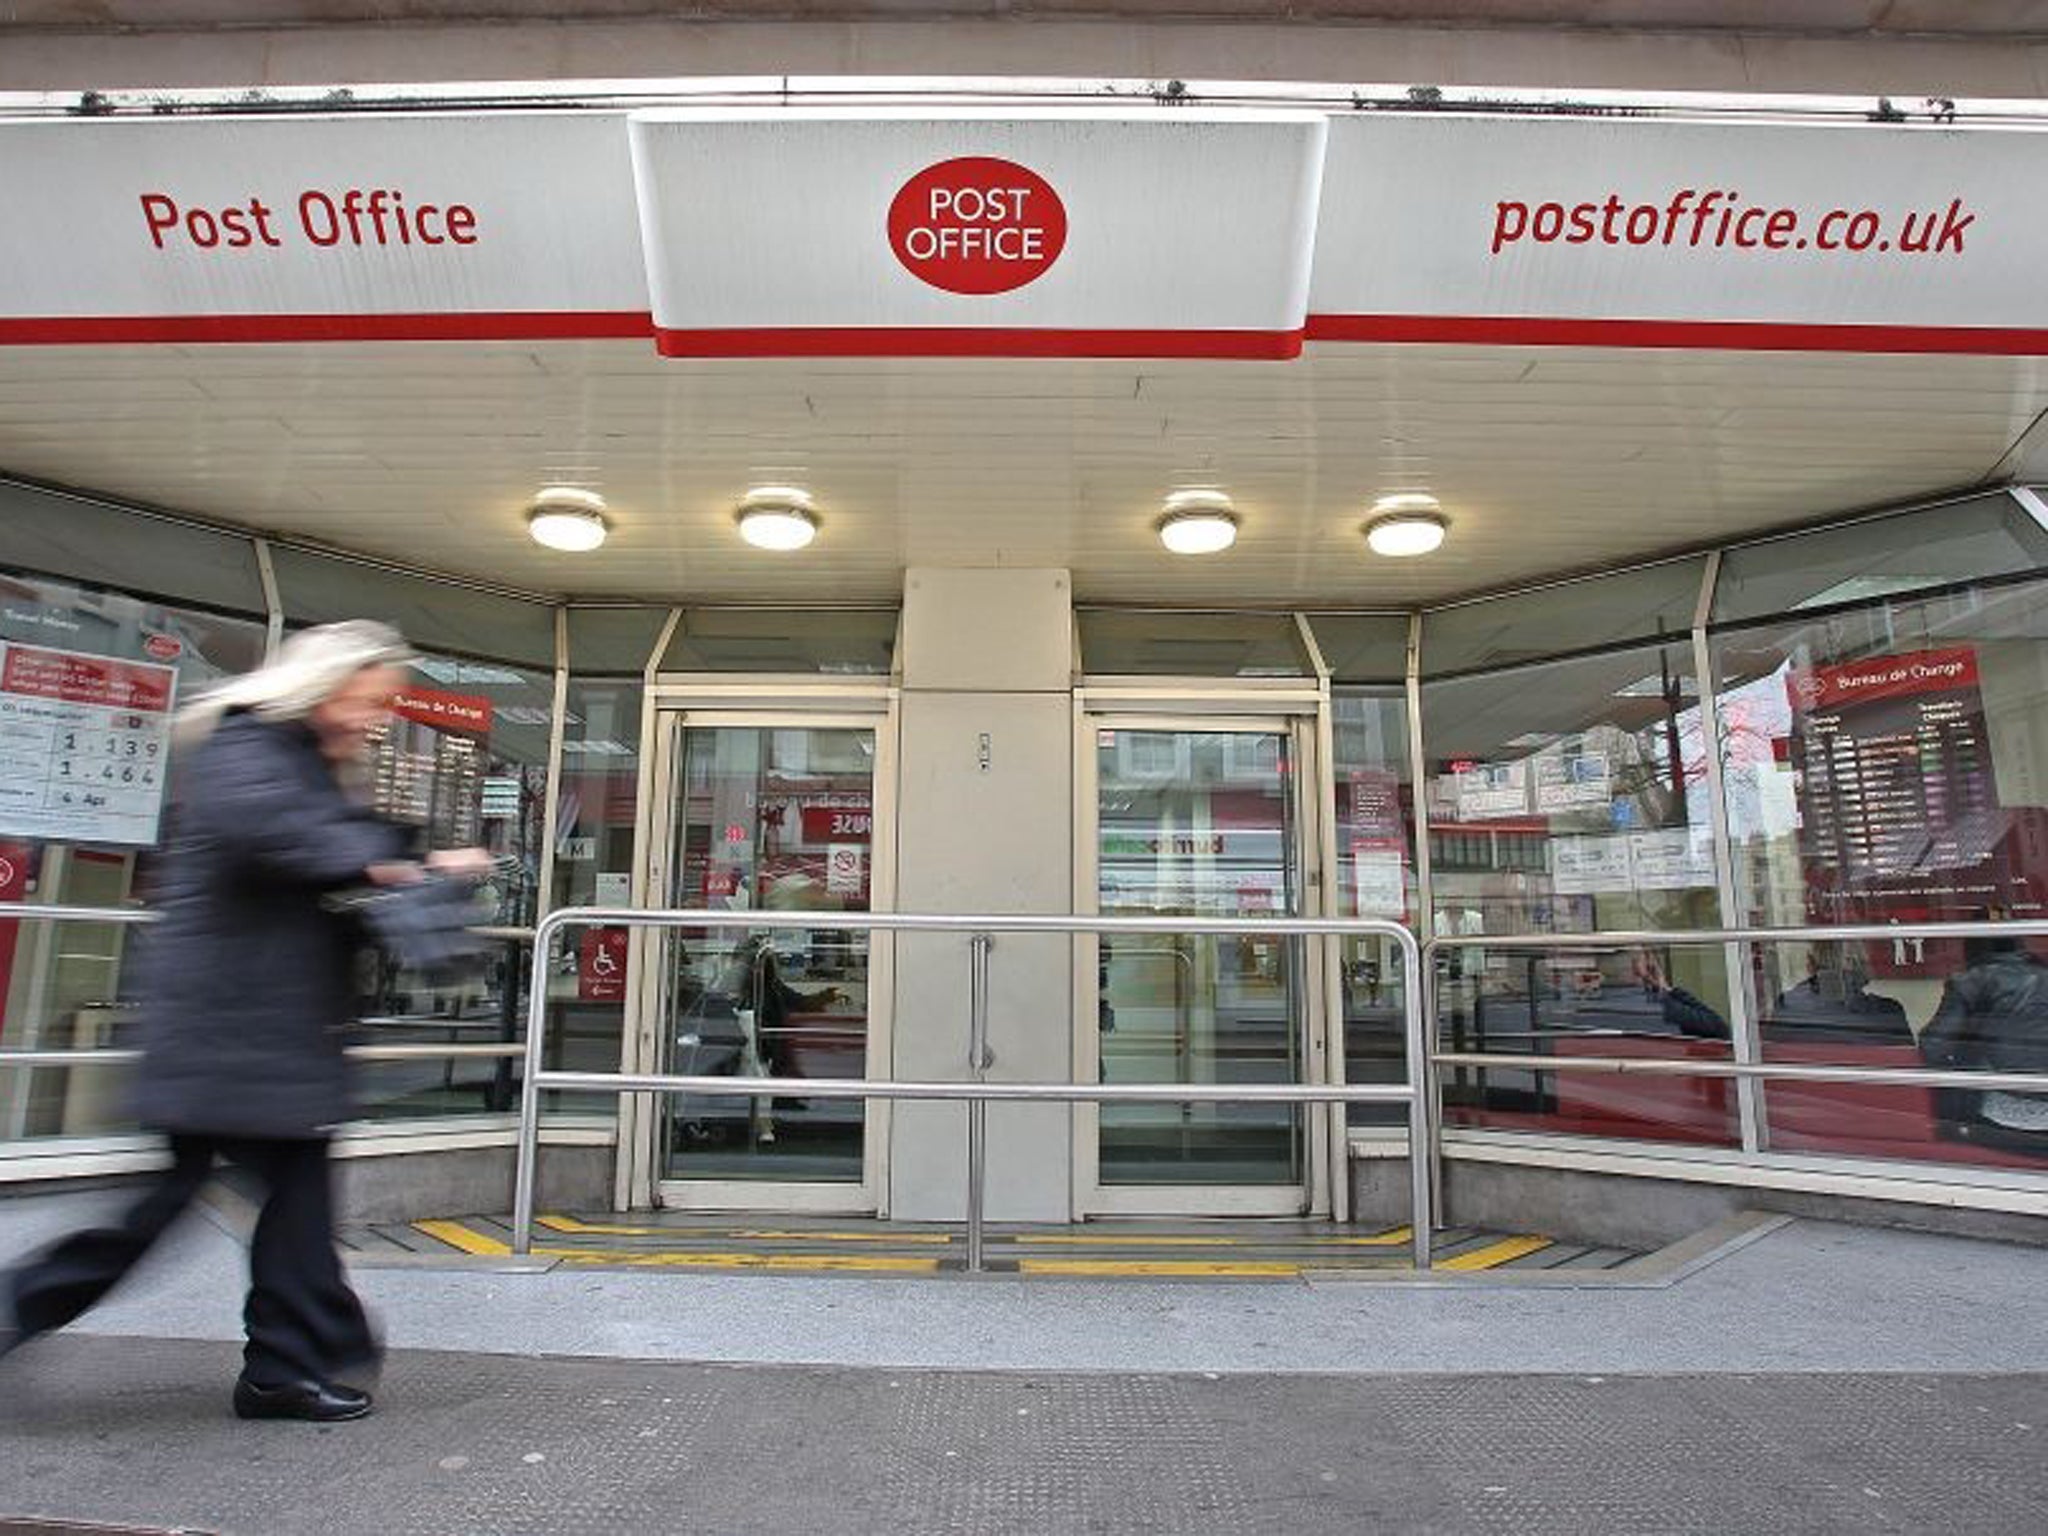 The Communication Workers Union is opposed to plans to franchise 70 of the Crown Post Office branches and close some others, saying hundreds of jobs will be affected